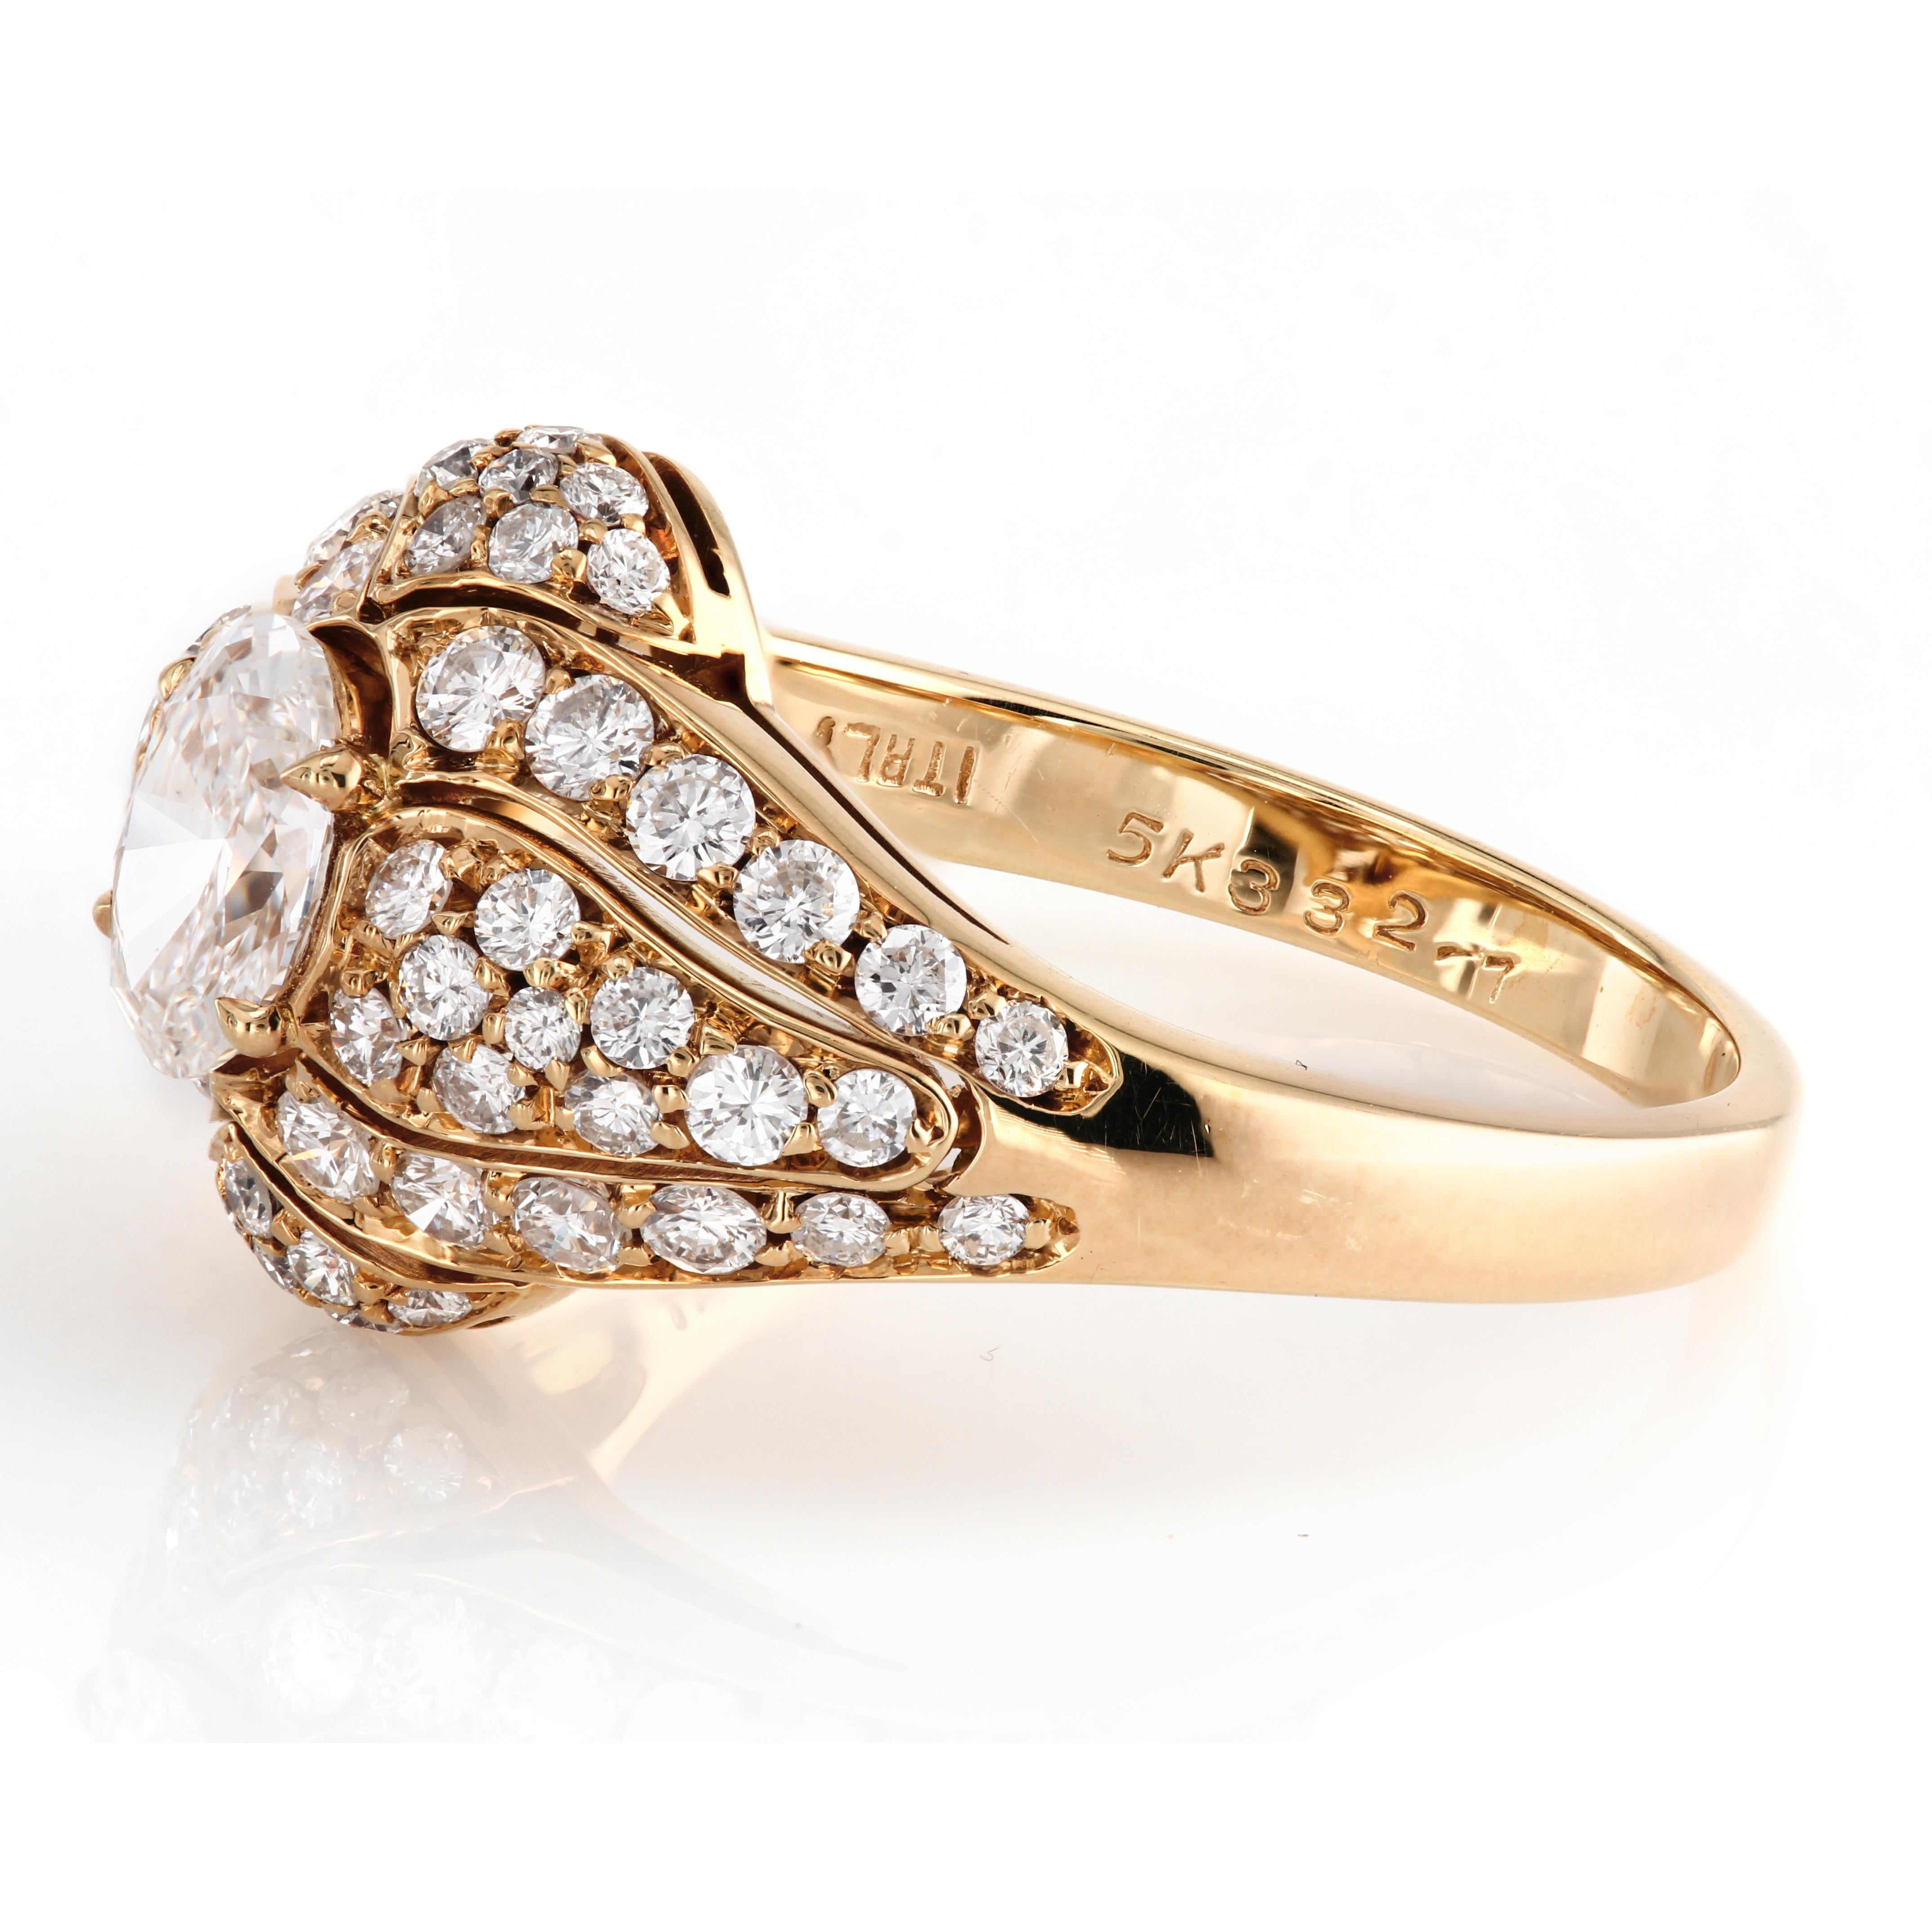 Oval Cut Van Cleef & Arpels Pave 18 Karat Gold Ring with Oval Diamond VCA